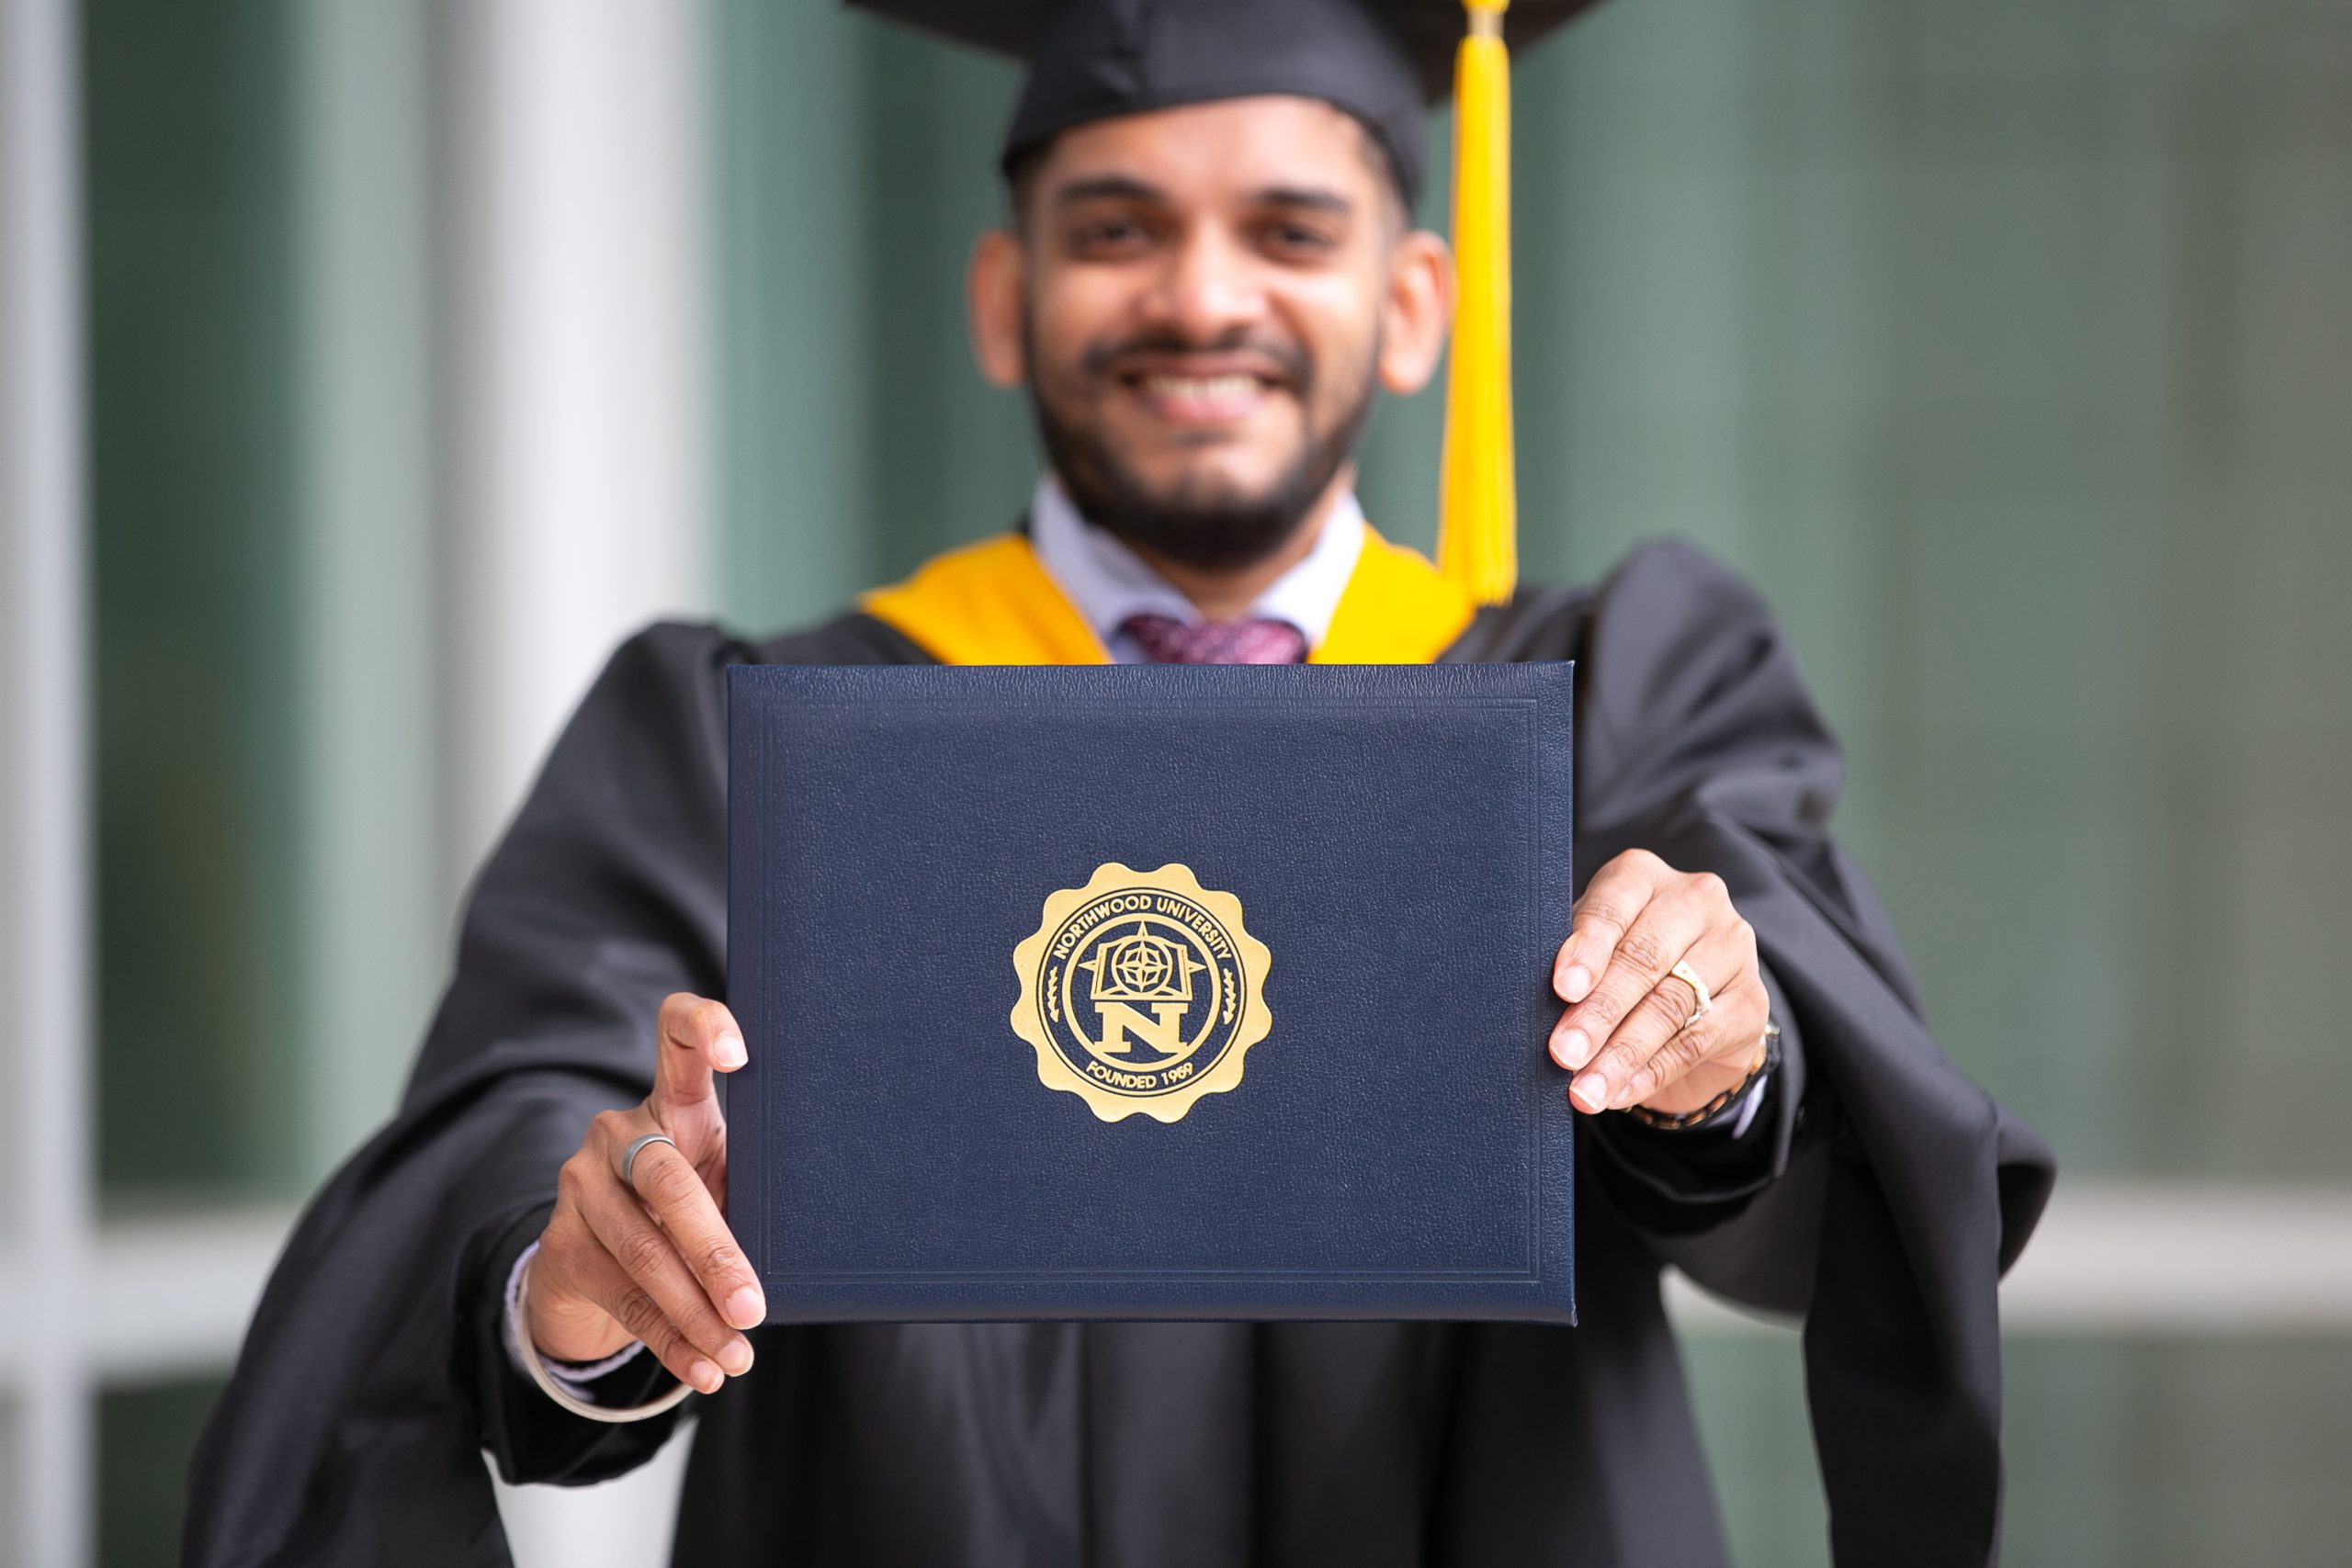 International student smiling and holding his diploma